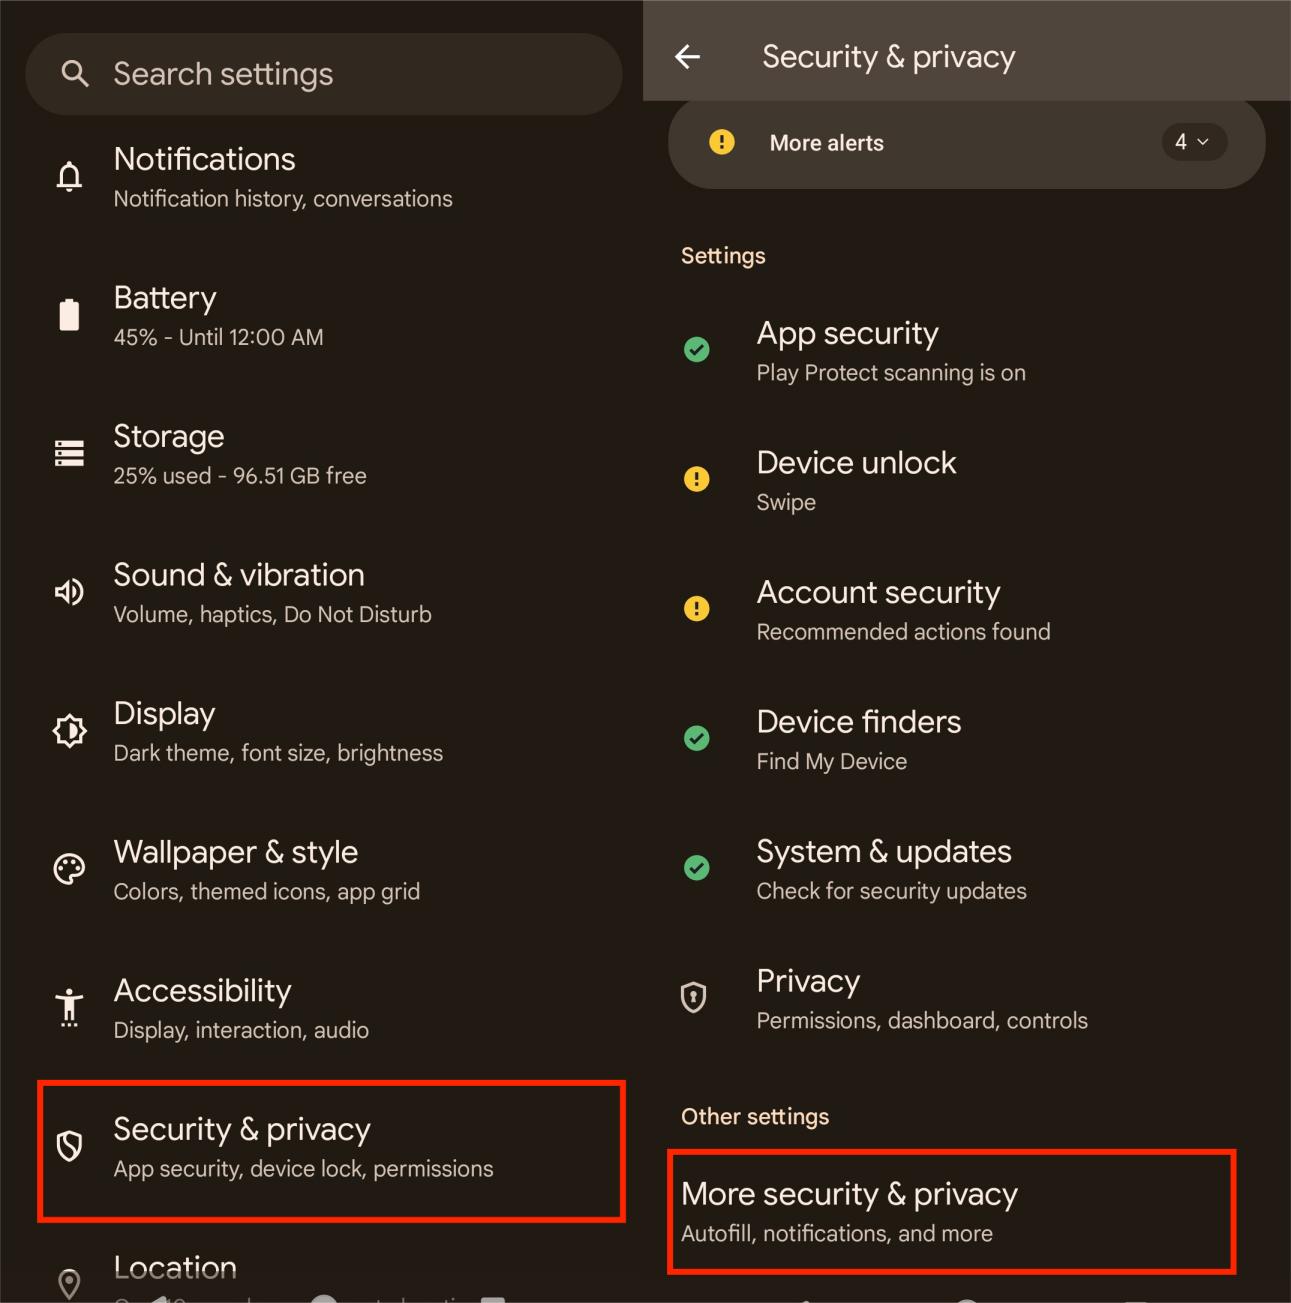 Tap more security & privacy